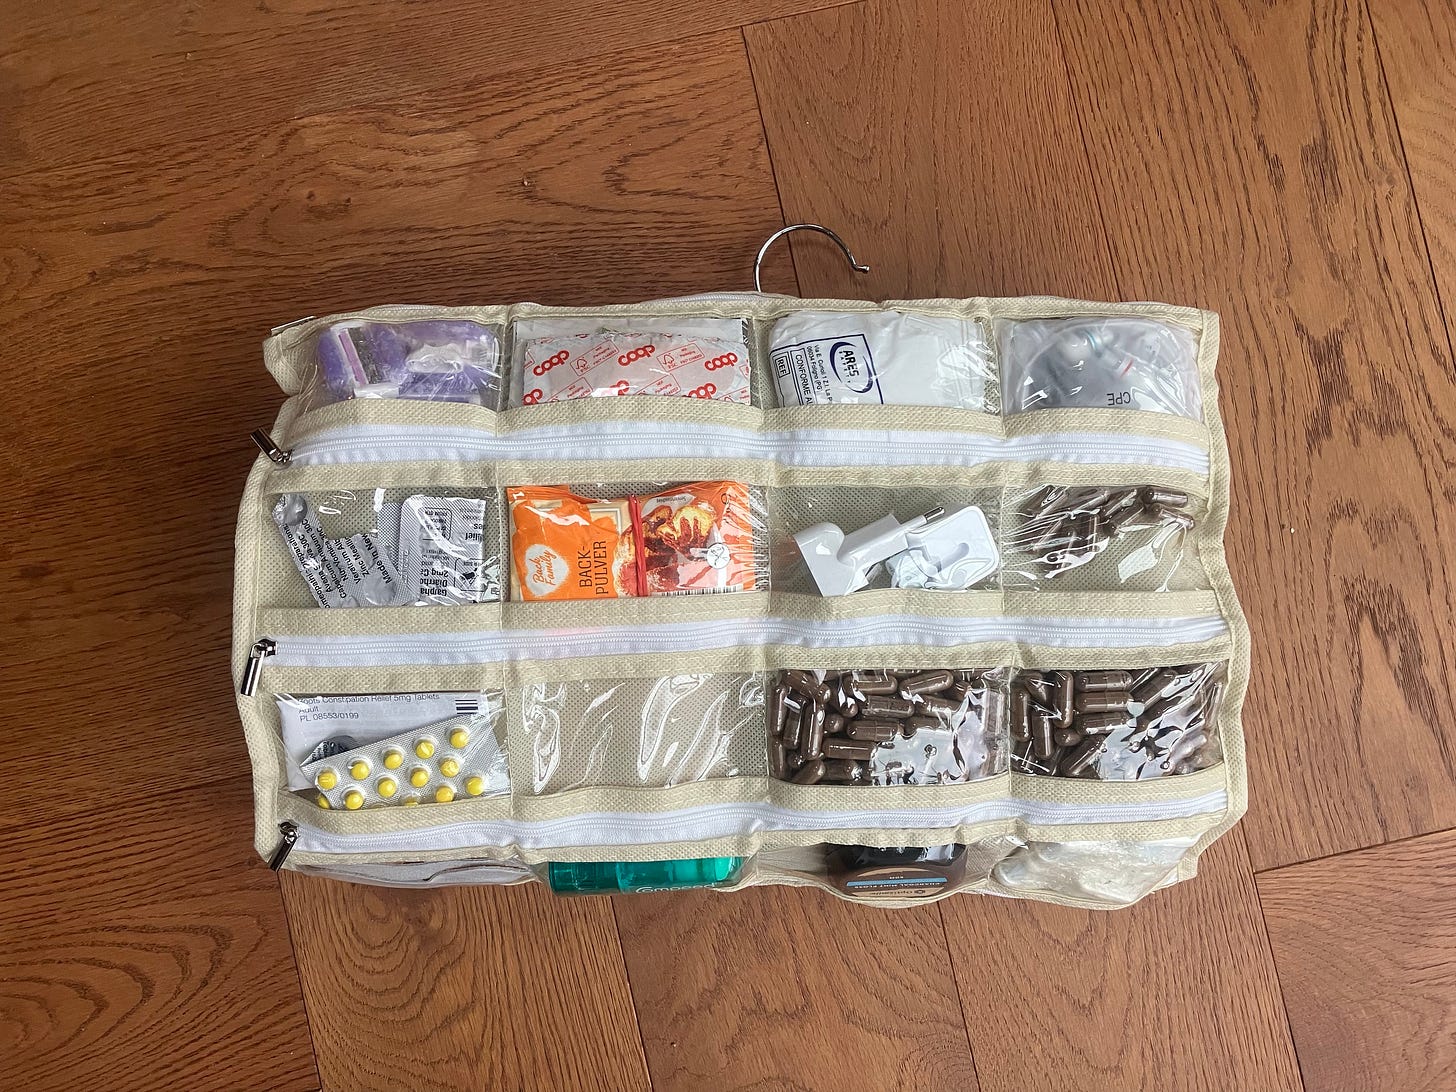 Plastic hanging pocket organizer folded up and laid against wood floor.